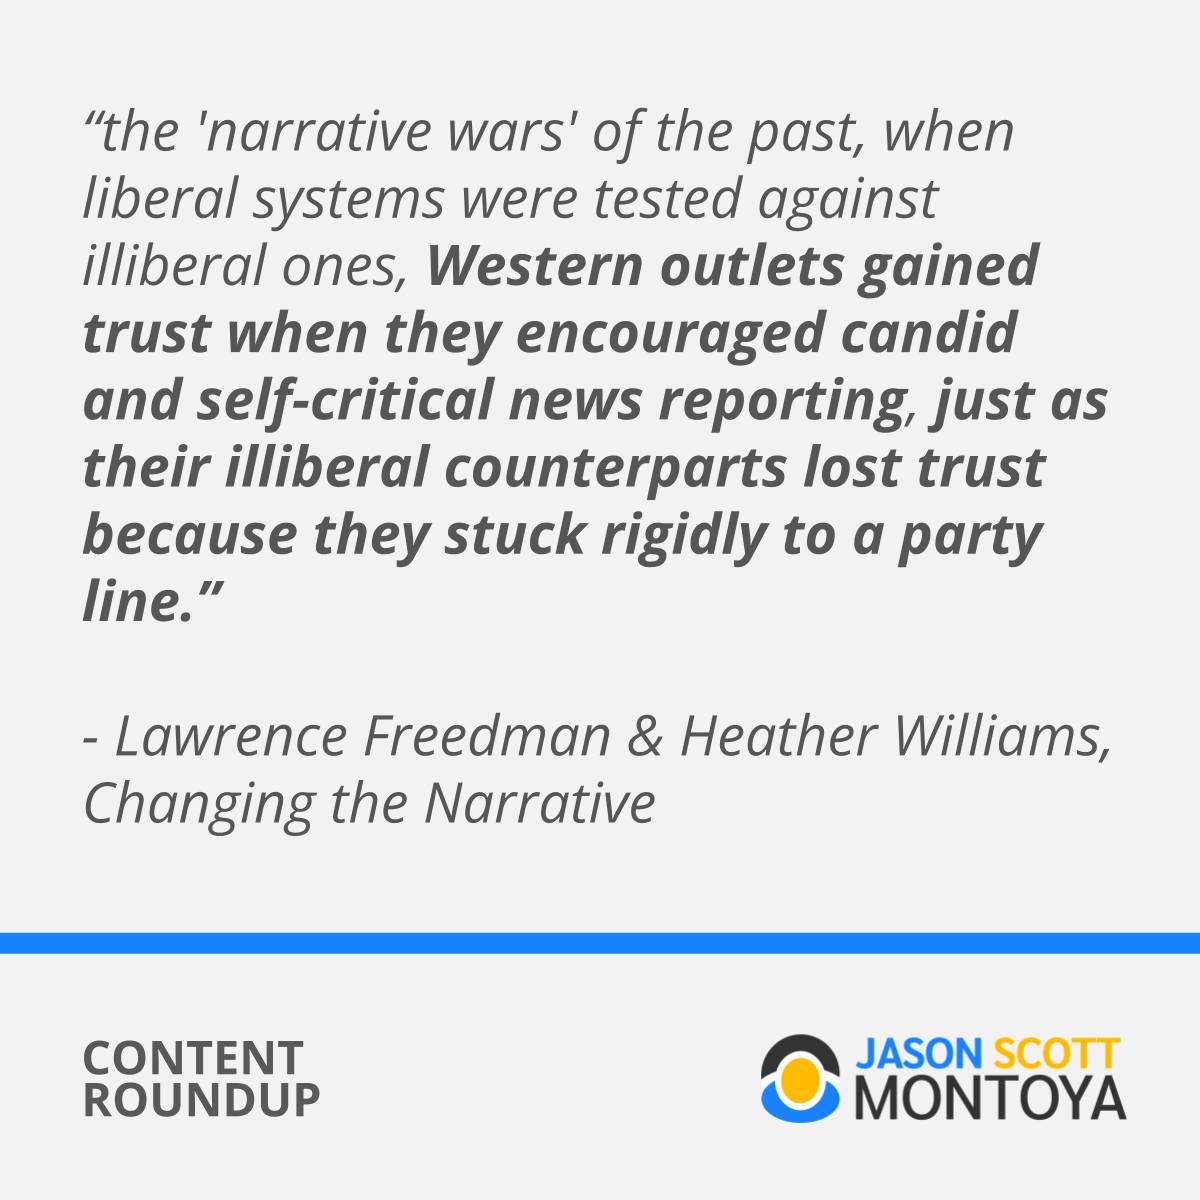 “the 'narrative wars' of the past, when liberal systems were tested against illiberal ones, Western outlets gained trust when they encouraged candid and self-critical news reporting, just as their illiberal counterparts lost trust because they stuck rigidly to a party line.”